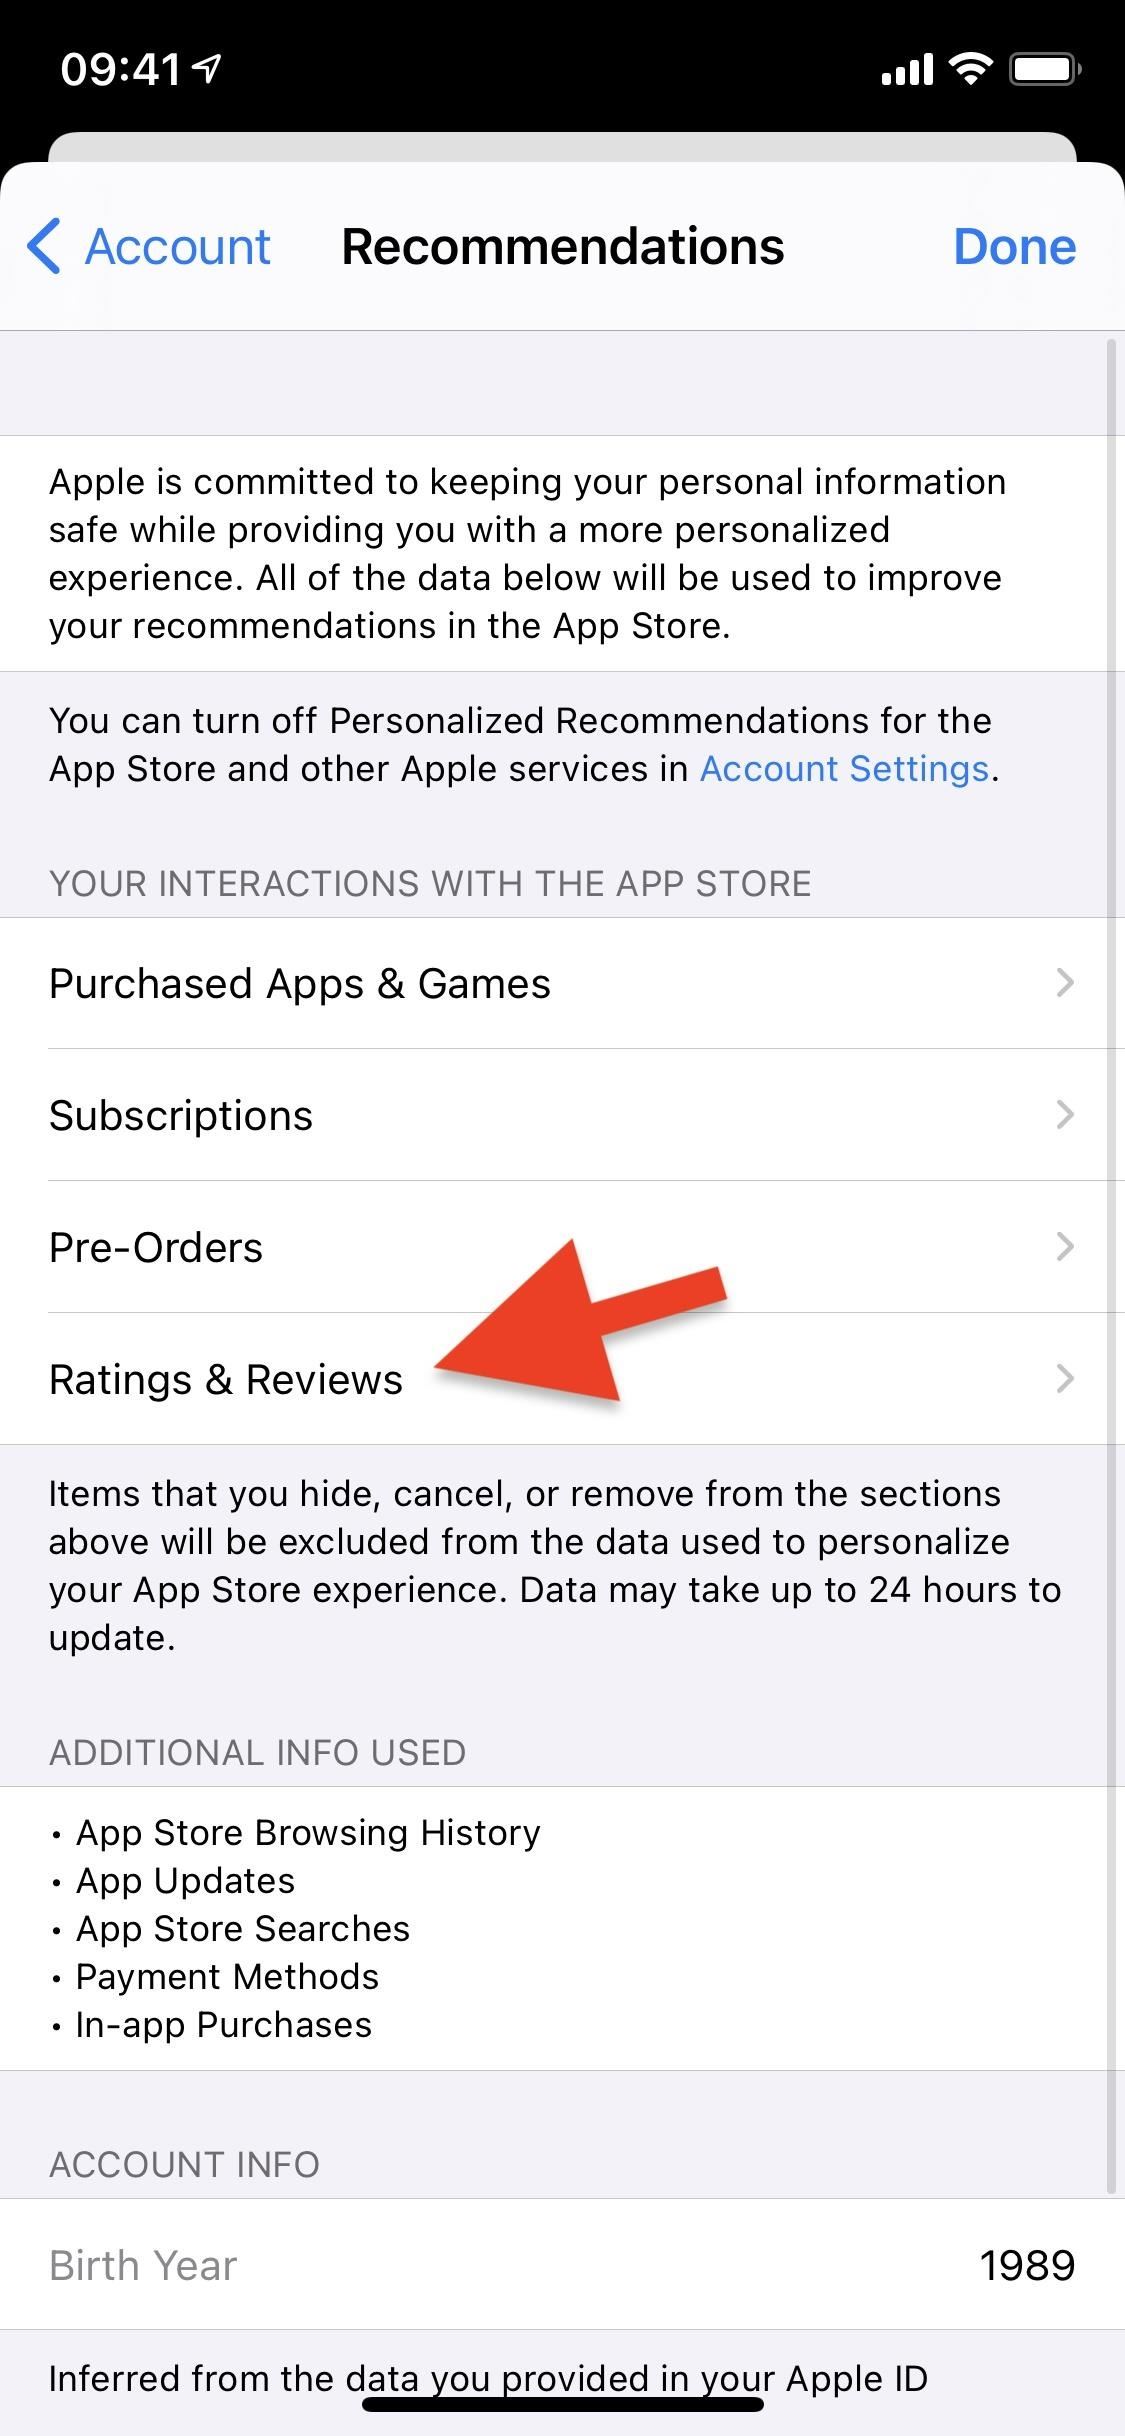 Apple Lets You See All the Ratings & Reviews You've Ever Given Apps, Games, Movies, TV, Music, Podcasts & Books